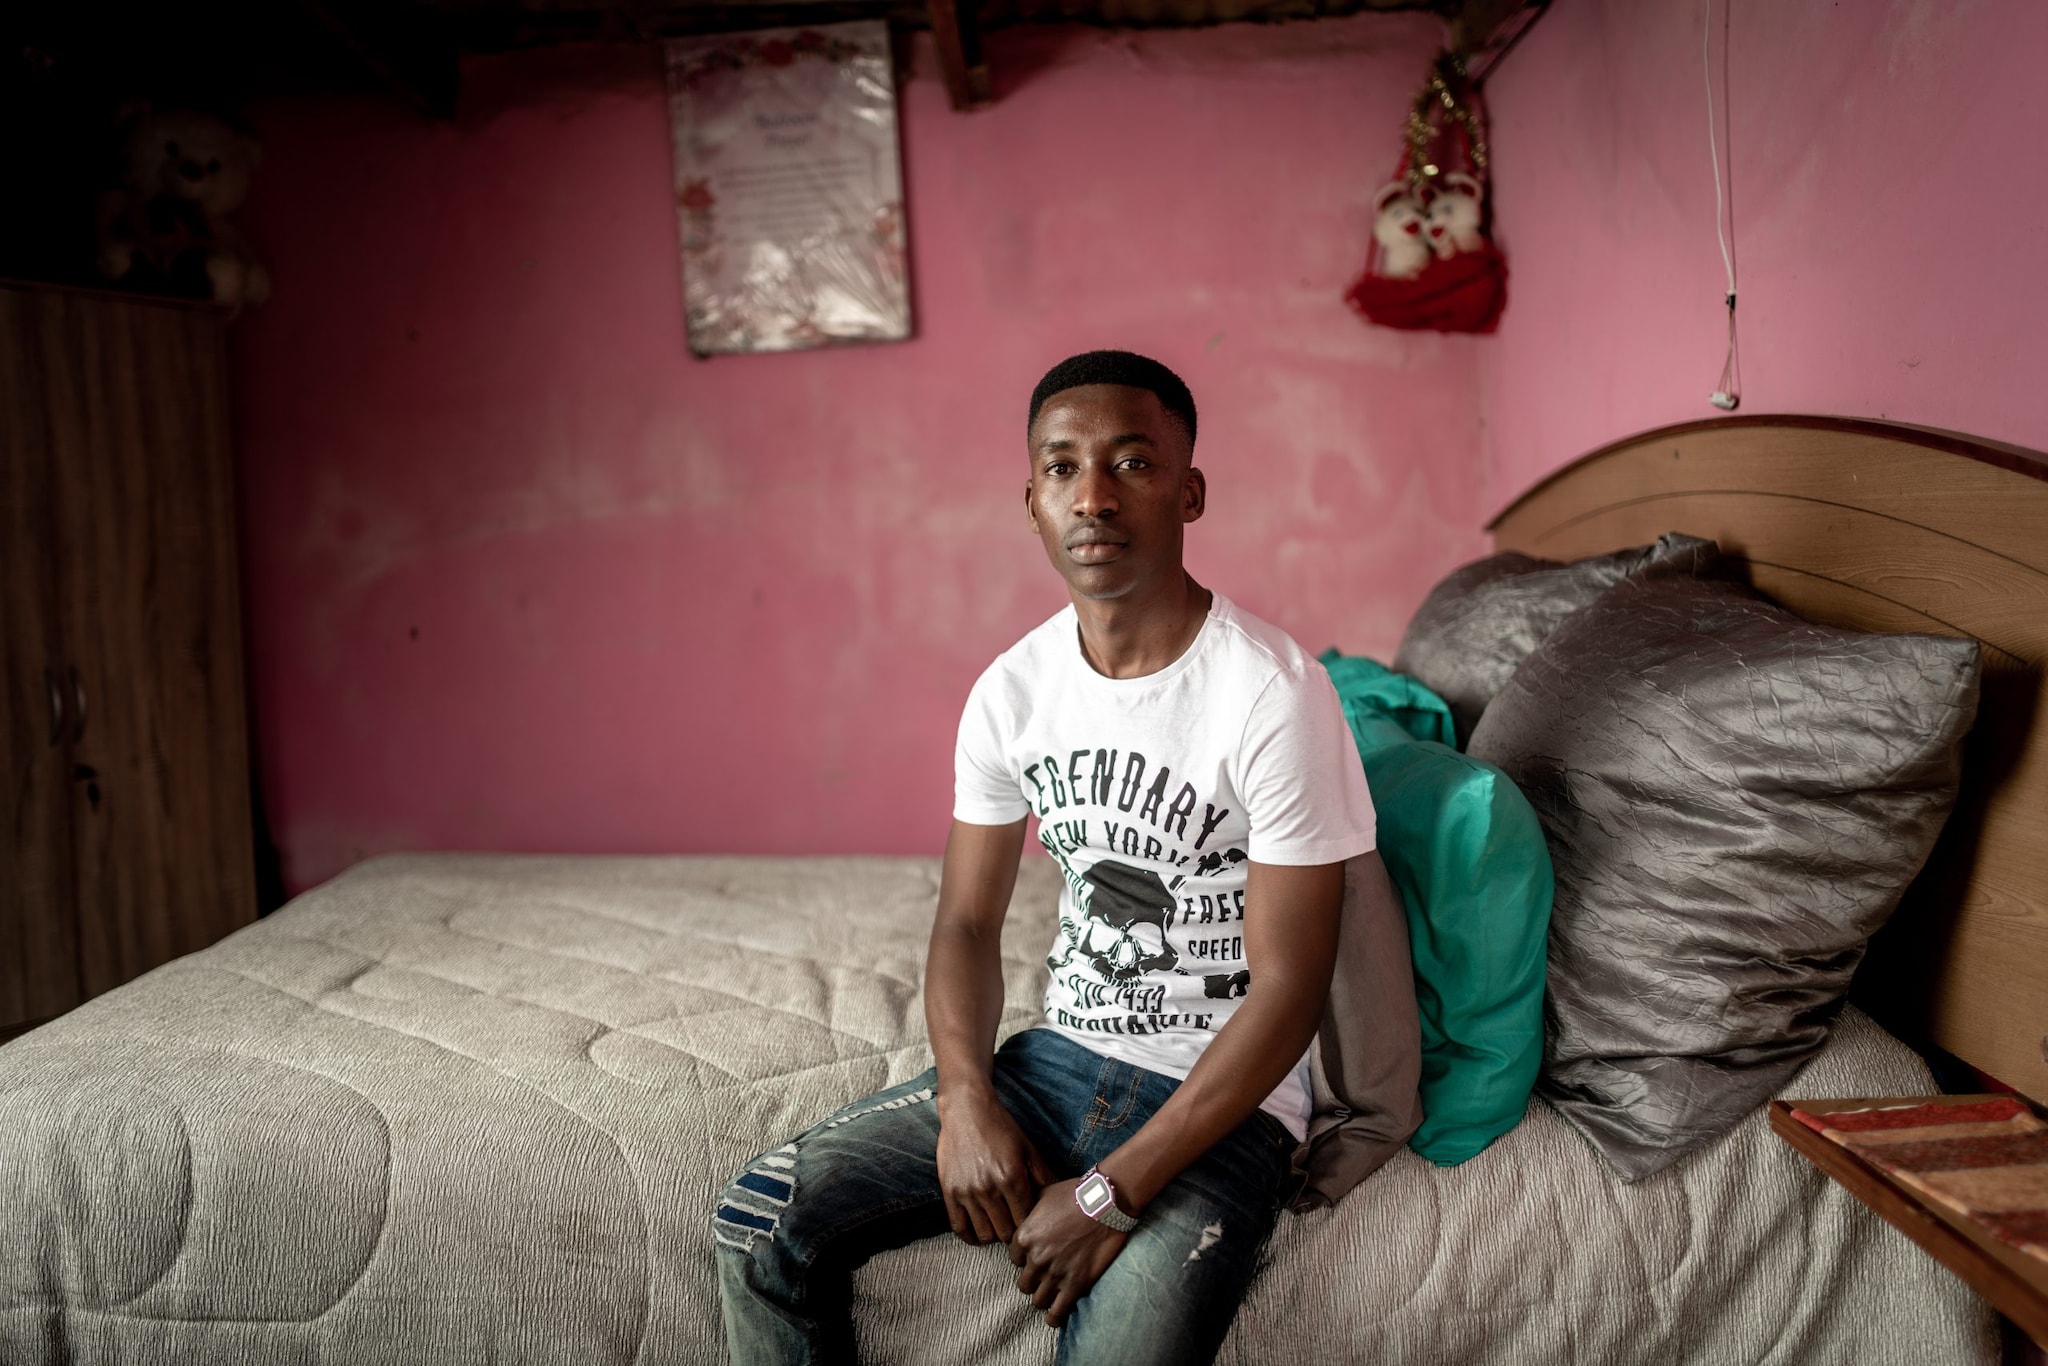 Young man in white shirt and jeans sits on bed.